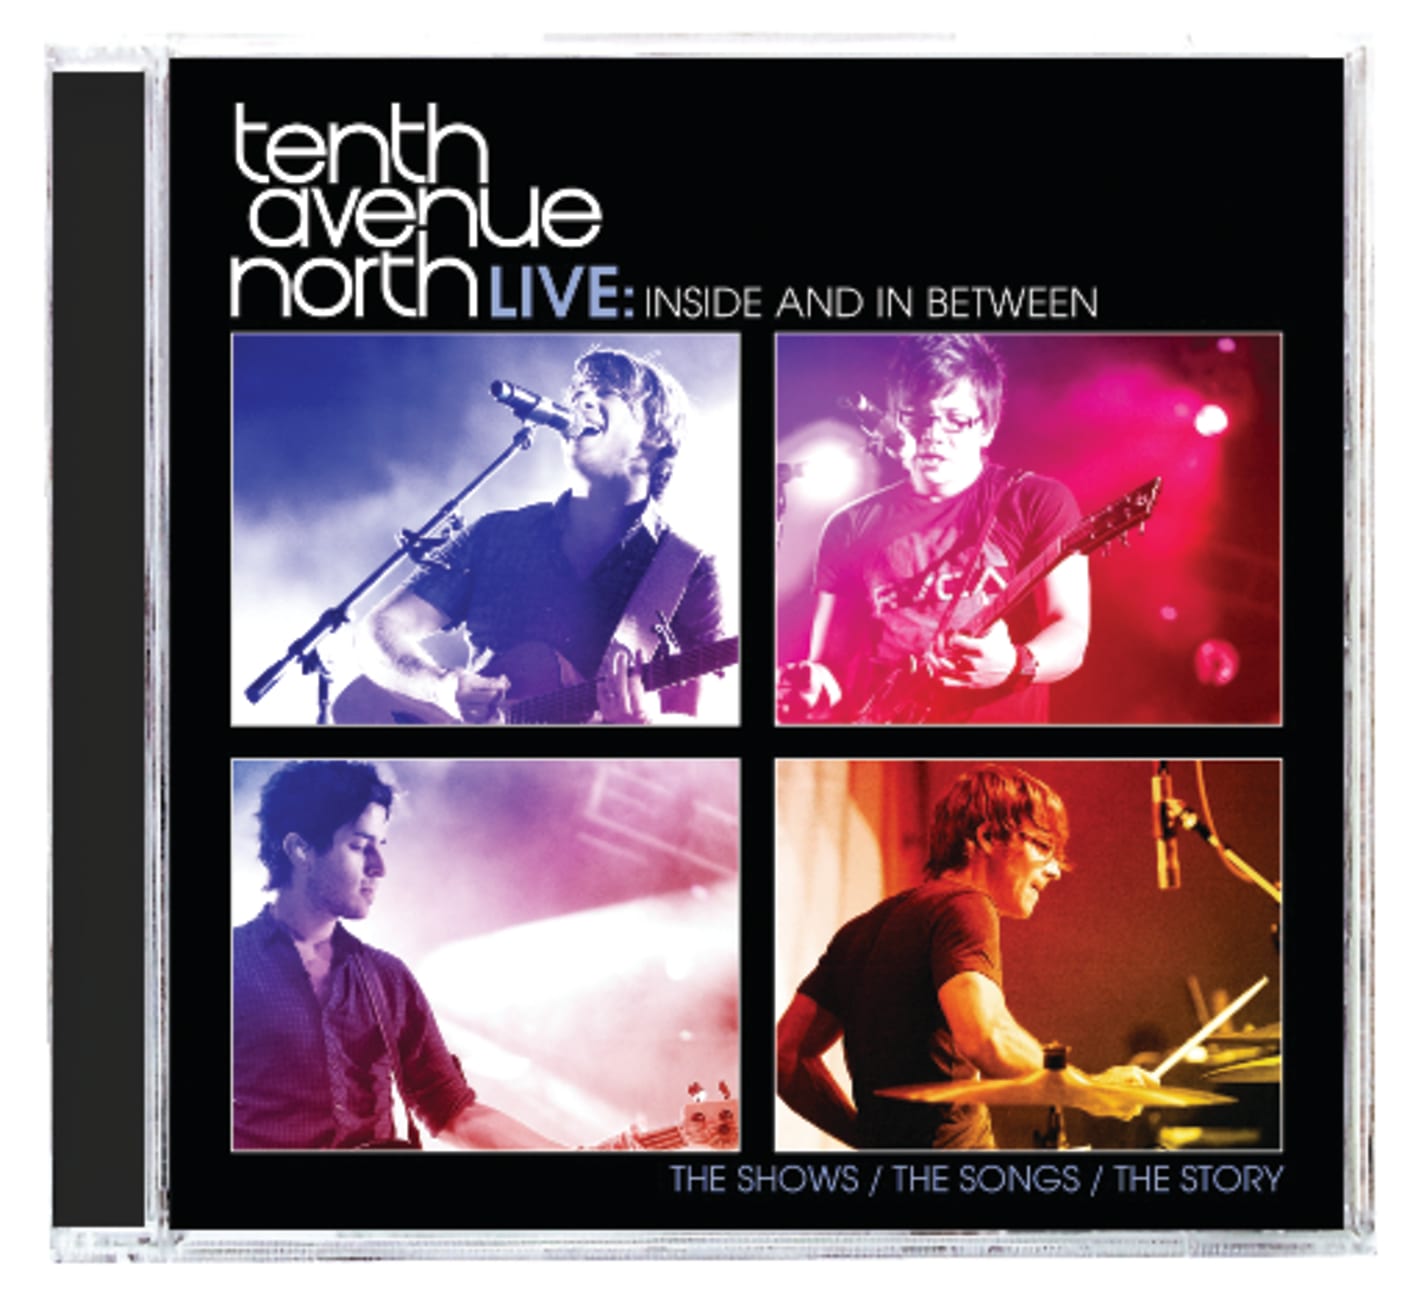 Inside and in Between (Cd/dvd) Compact Disc